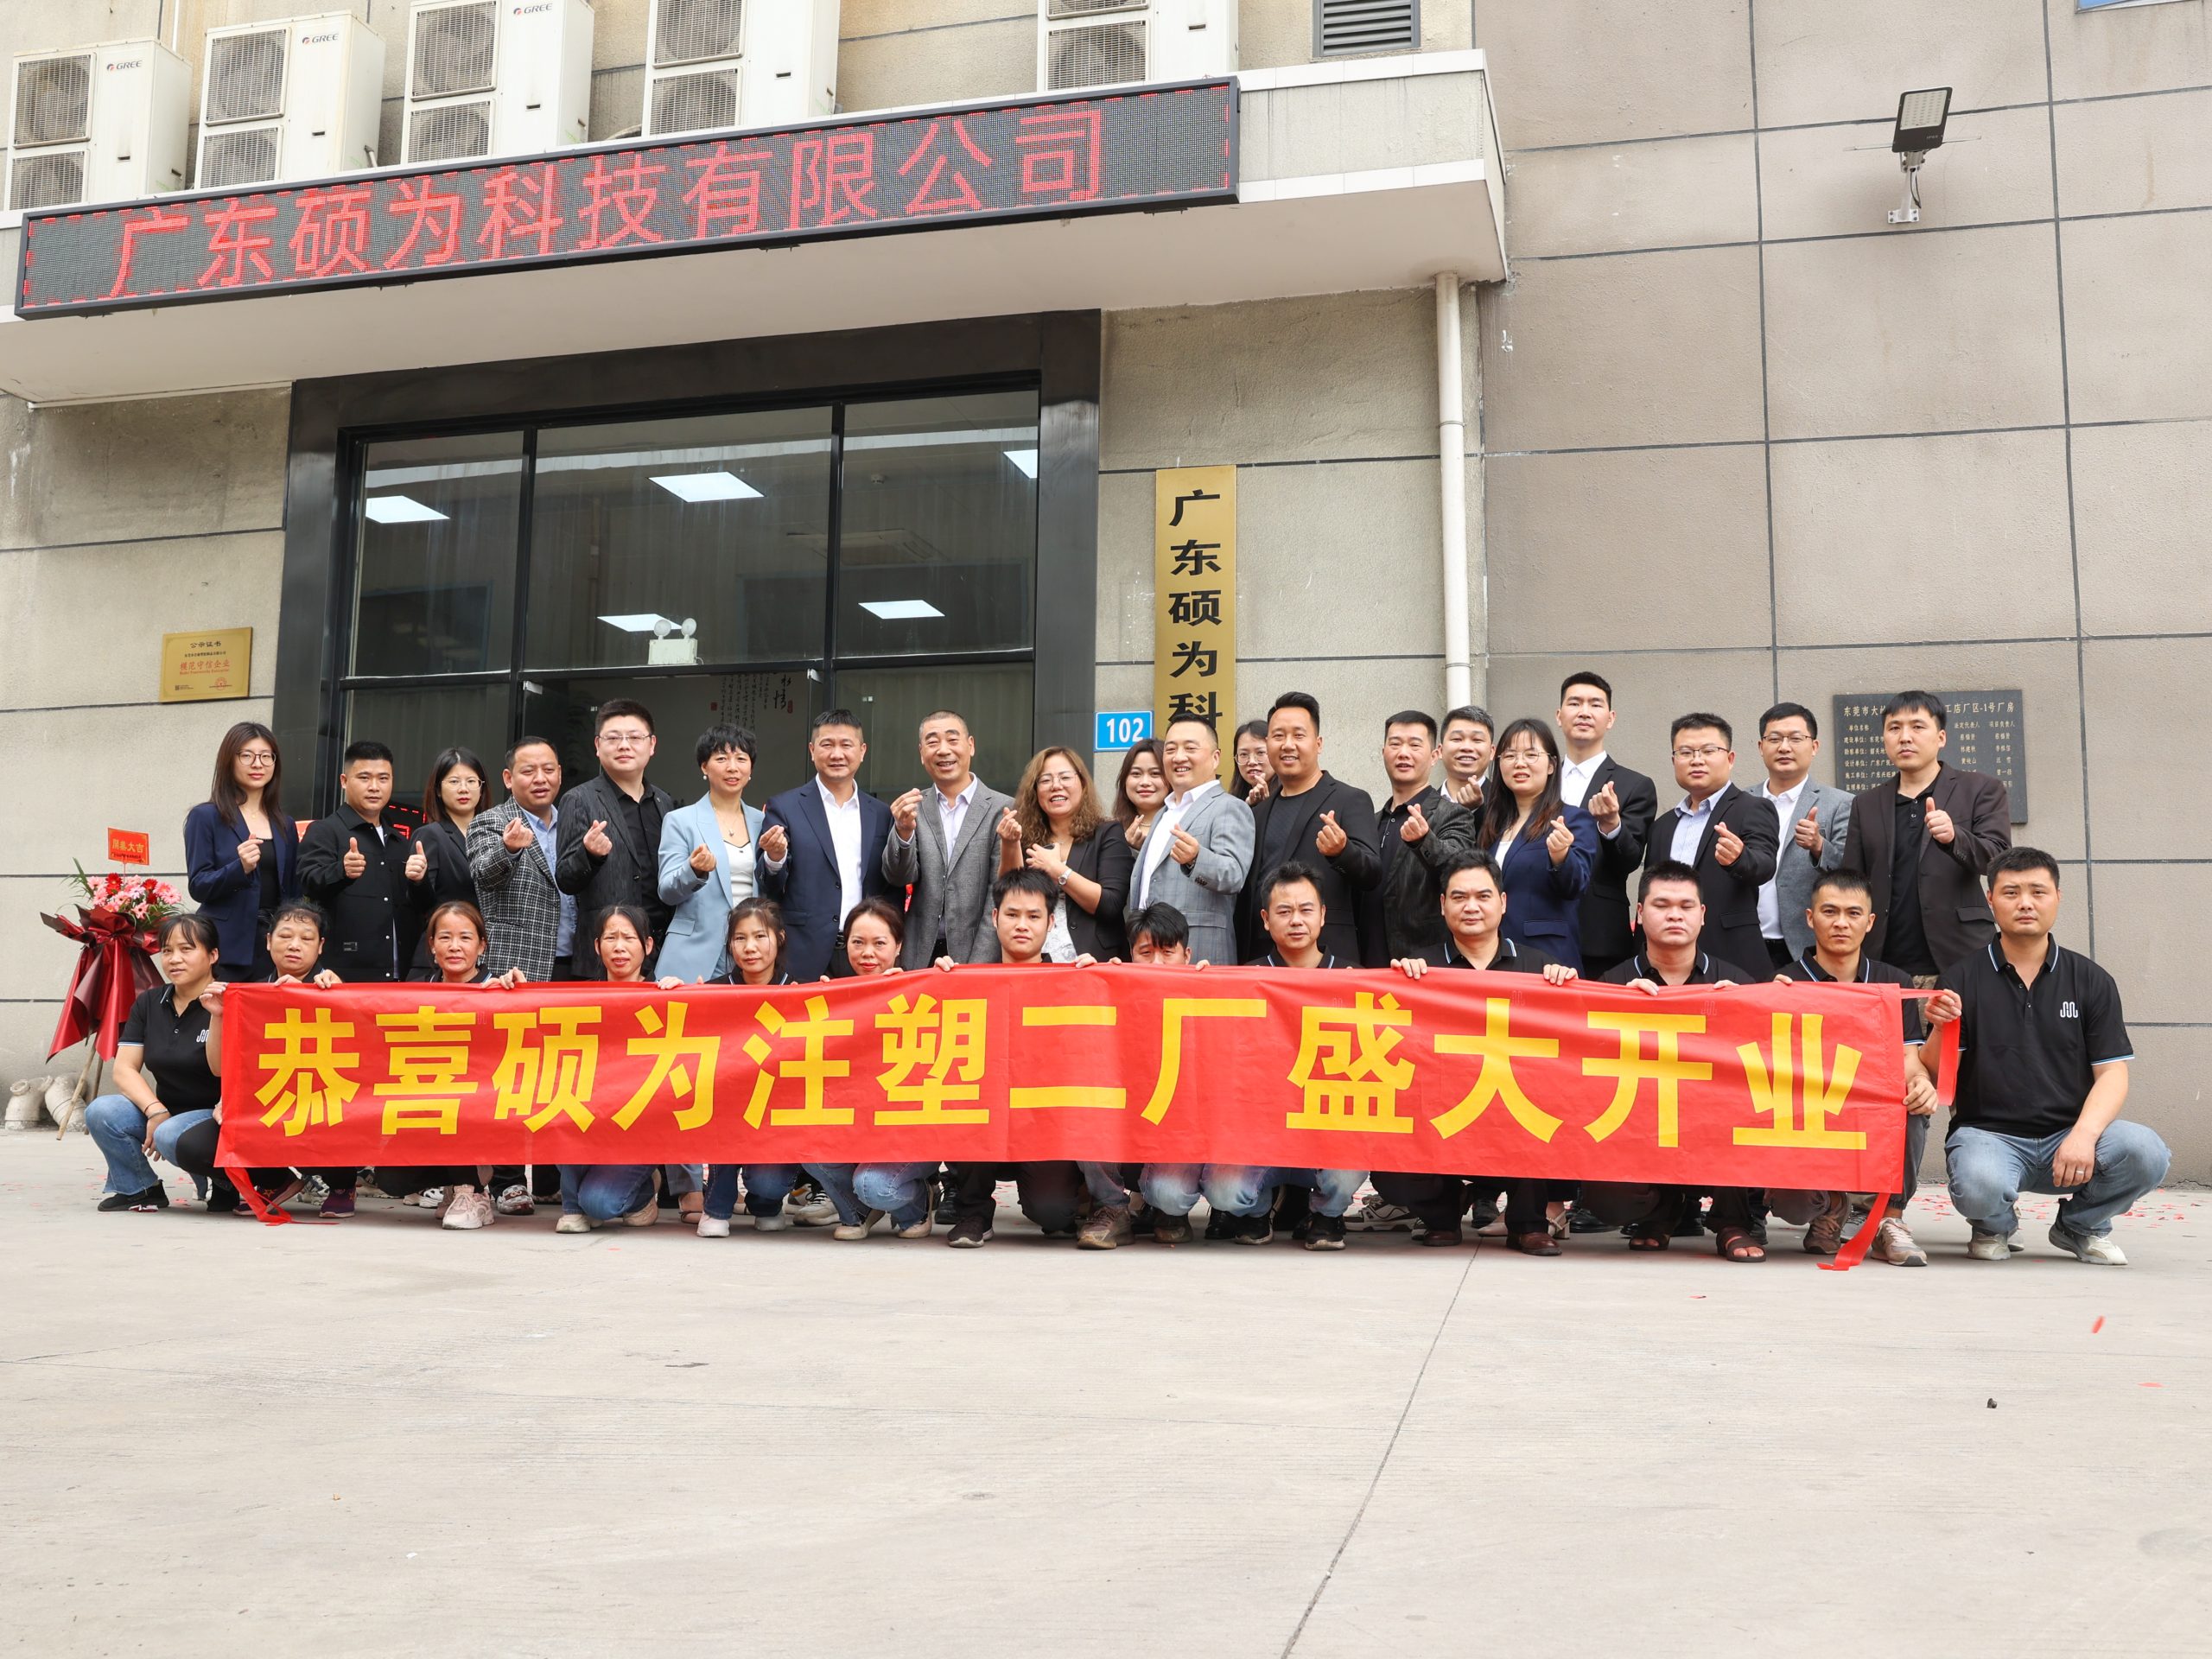 Highlight Moment of March-Guangdong Shuowei Factory No. 2 grandly opened, embarking on a new journey!